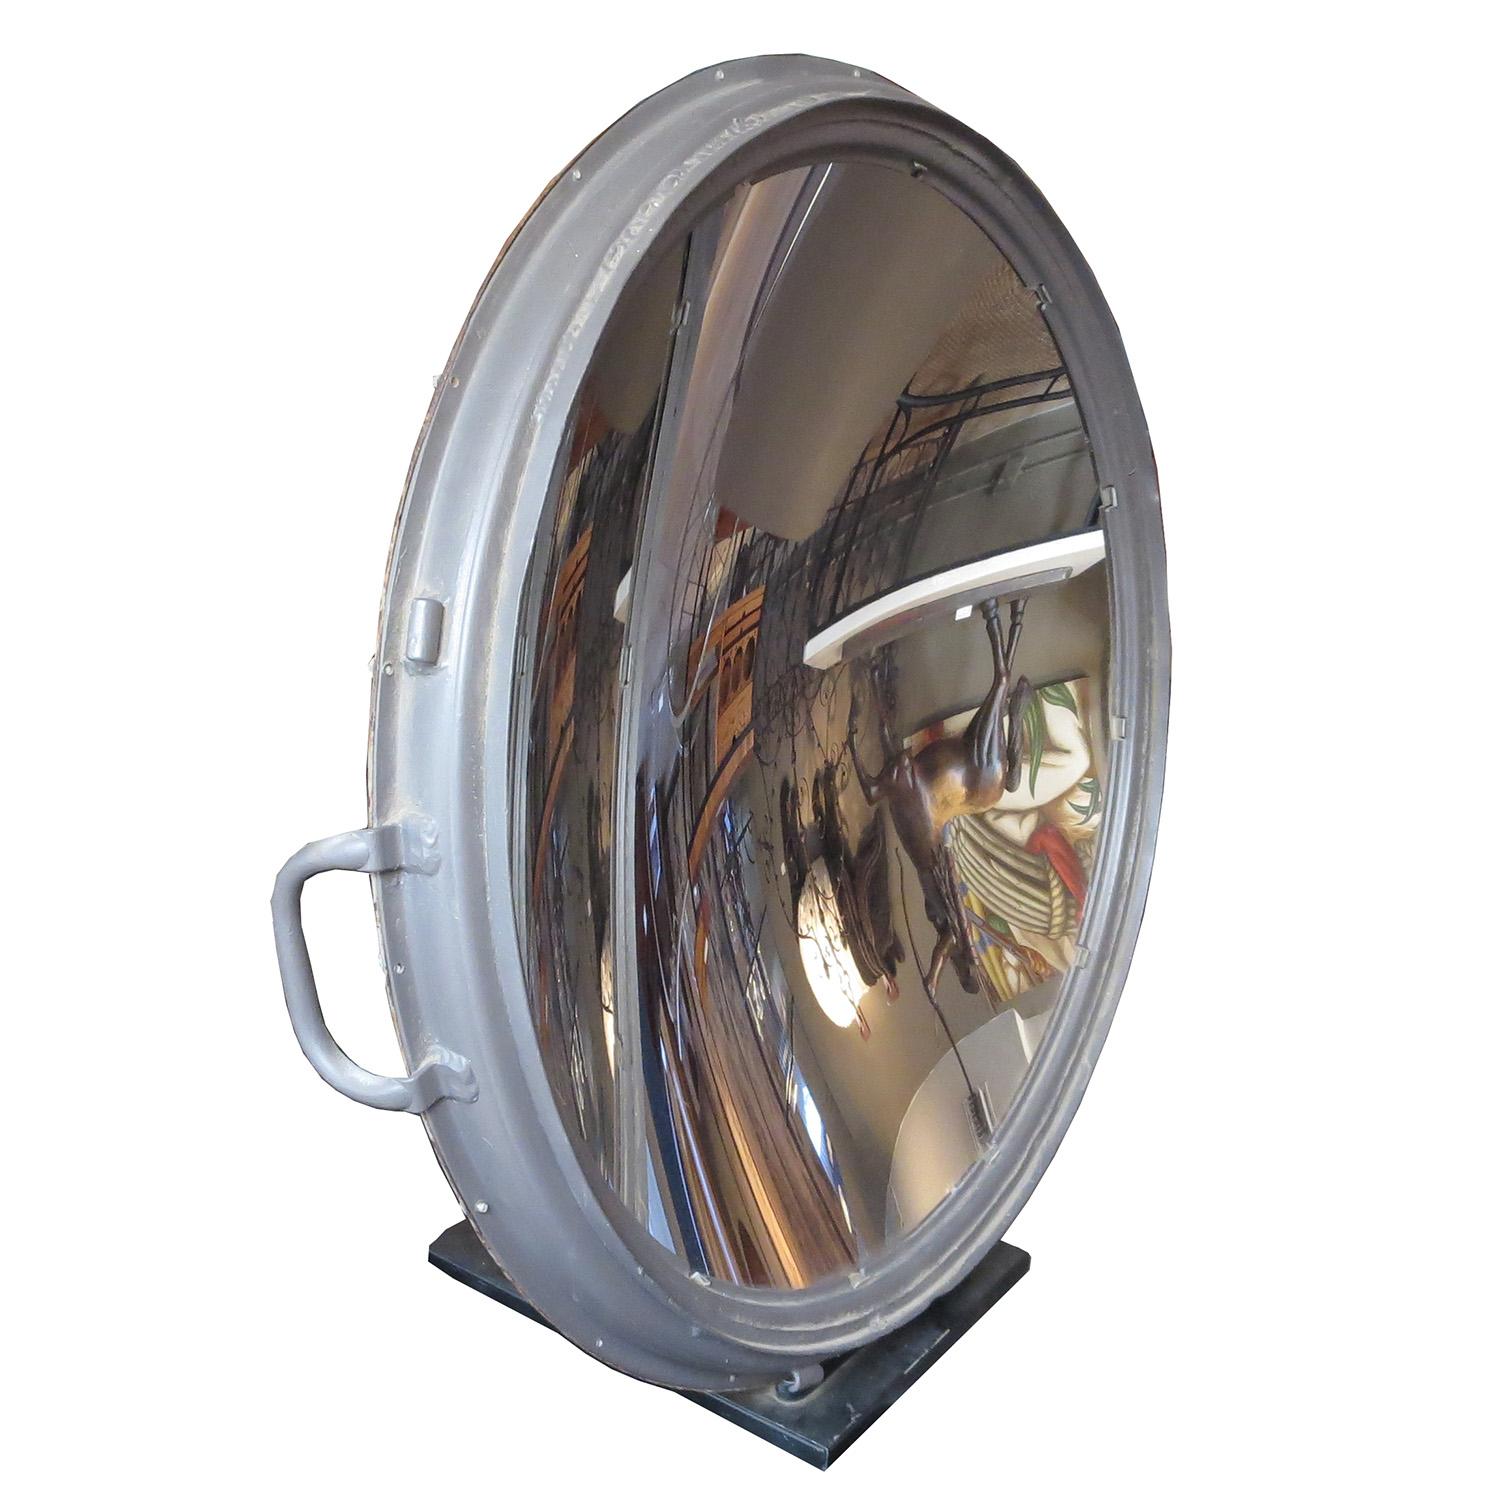 Large Table Mounted Parabolic Mirror by G.E.